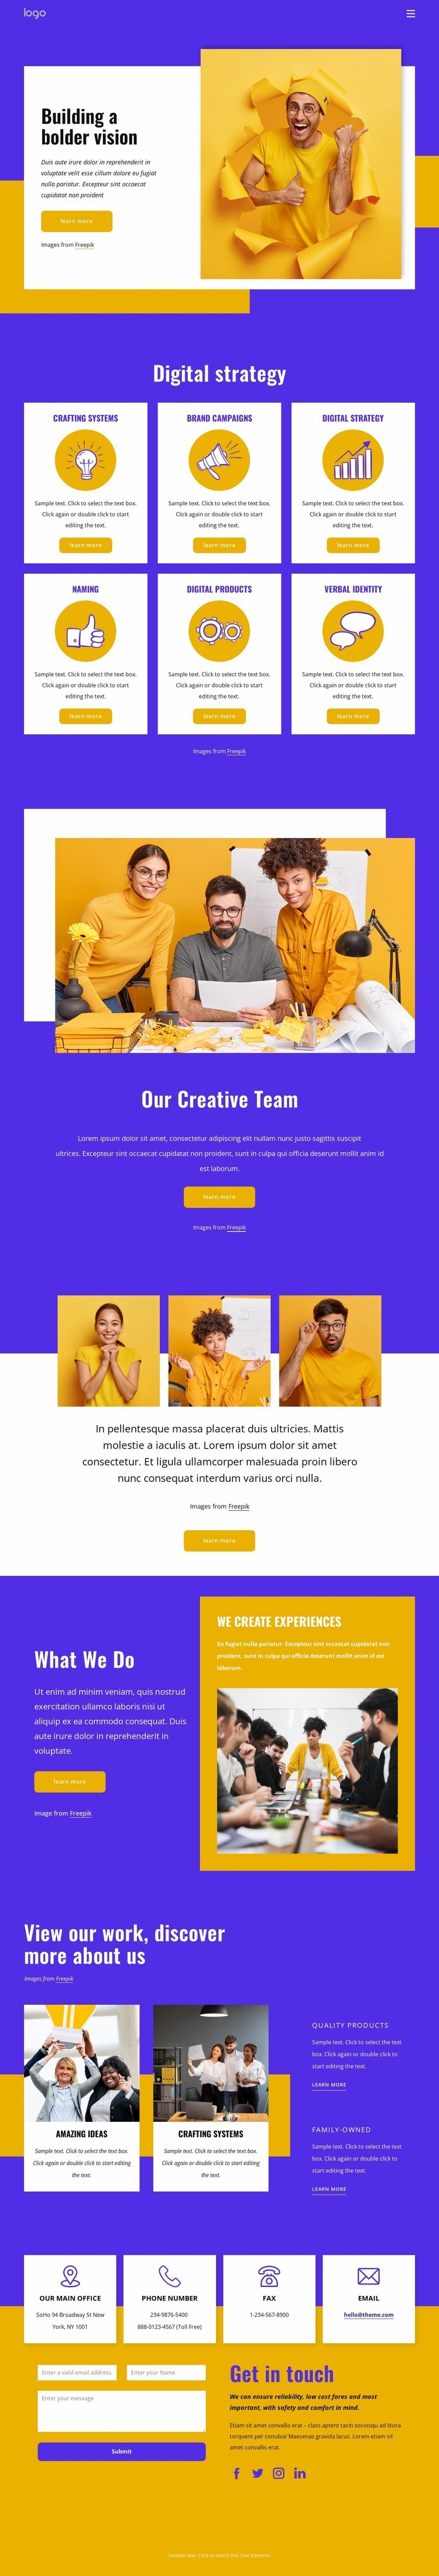 UX design and branding agency Html Code Example